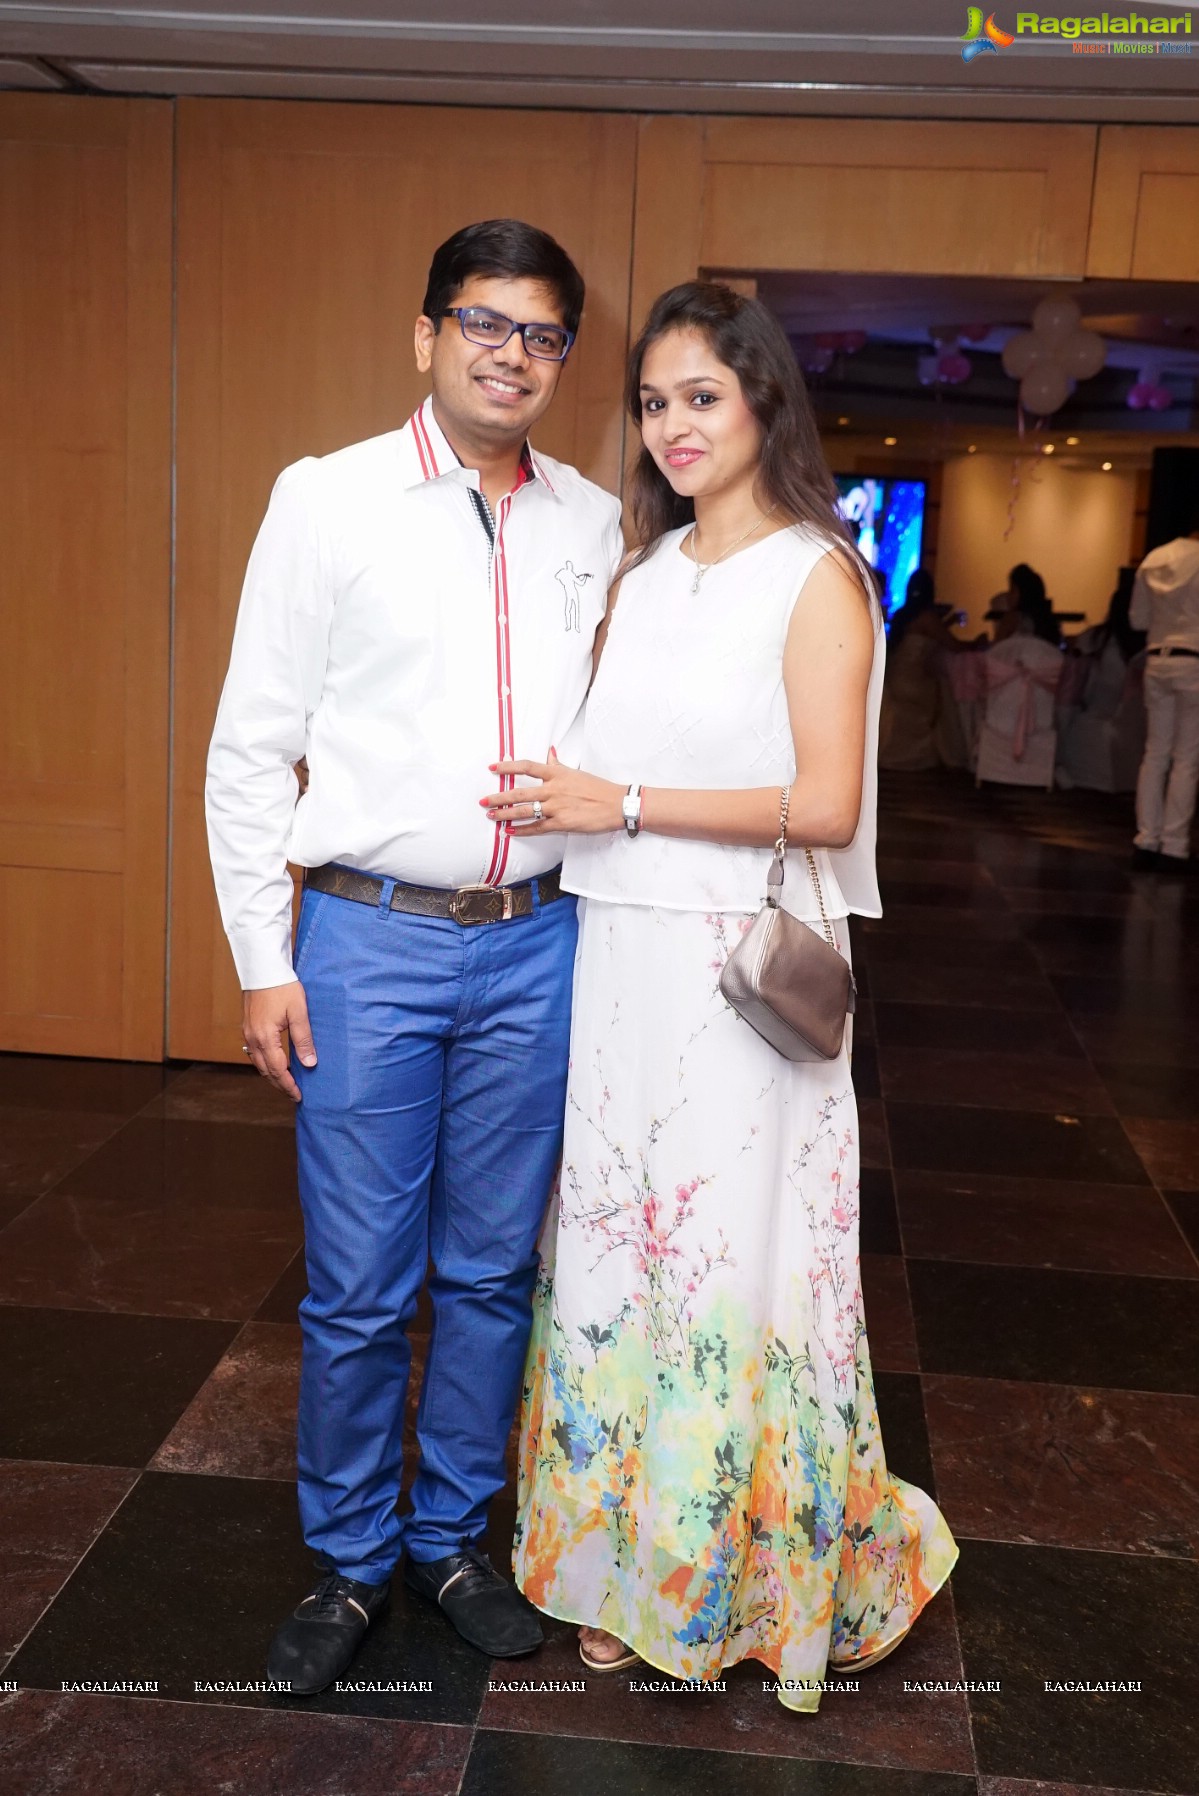 Rock and Roll Presents Holi Dhamaal with Musical Antakshari - Hosted by Sanjay and Neha at Marriott